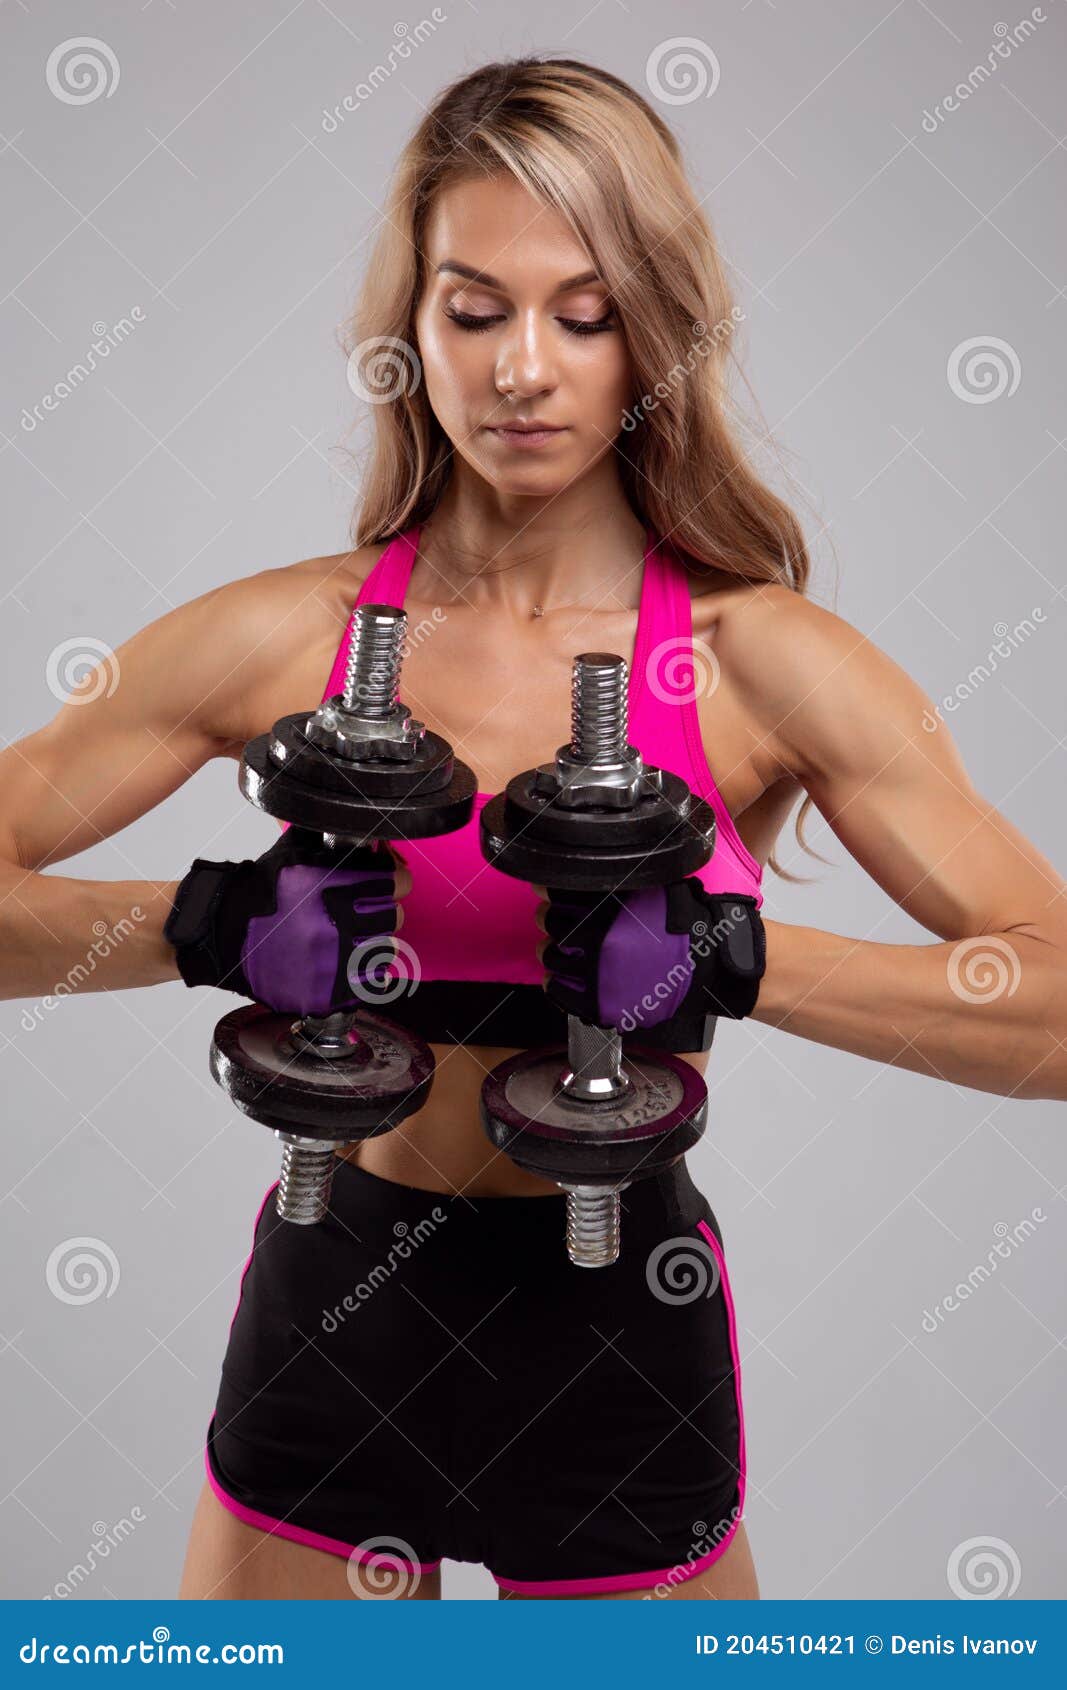 Beautiful Young Woman Doing Exercises With Dumbbells On The Biceps Photo Of A Sporty Woman With